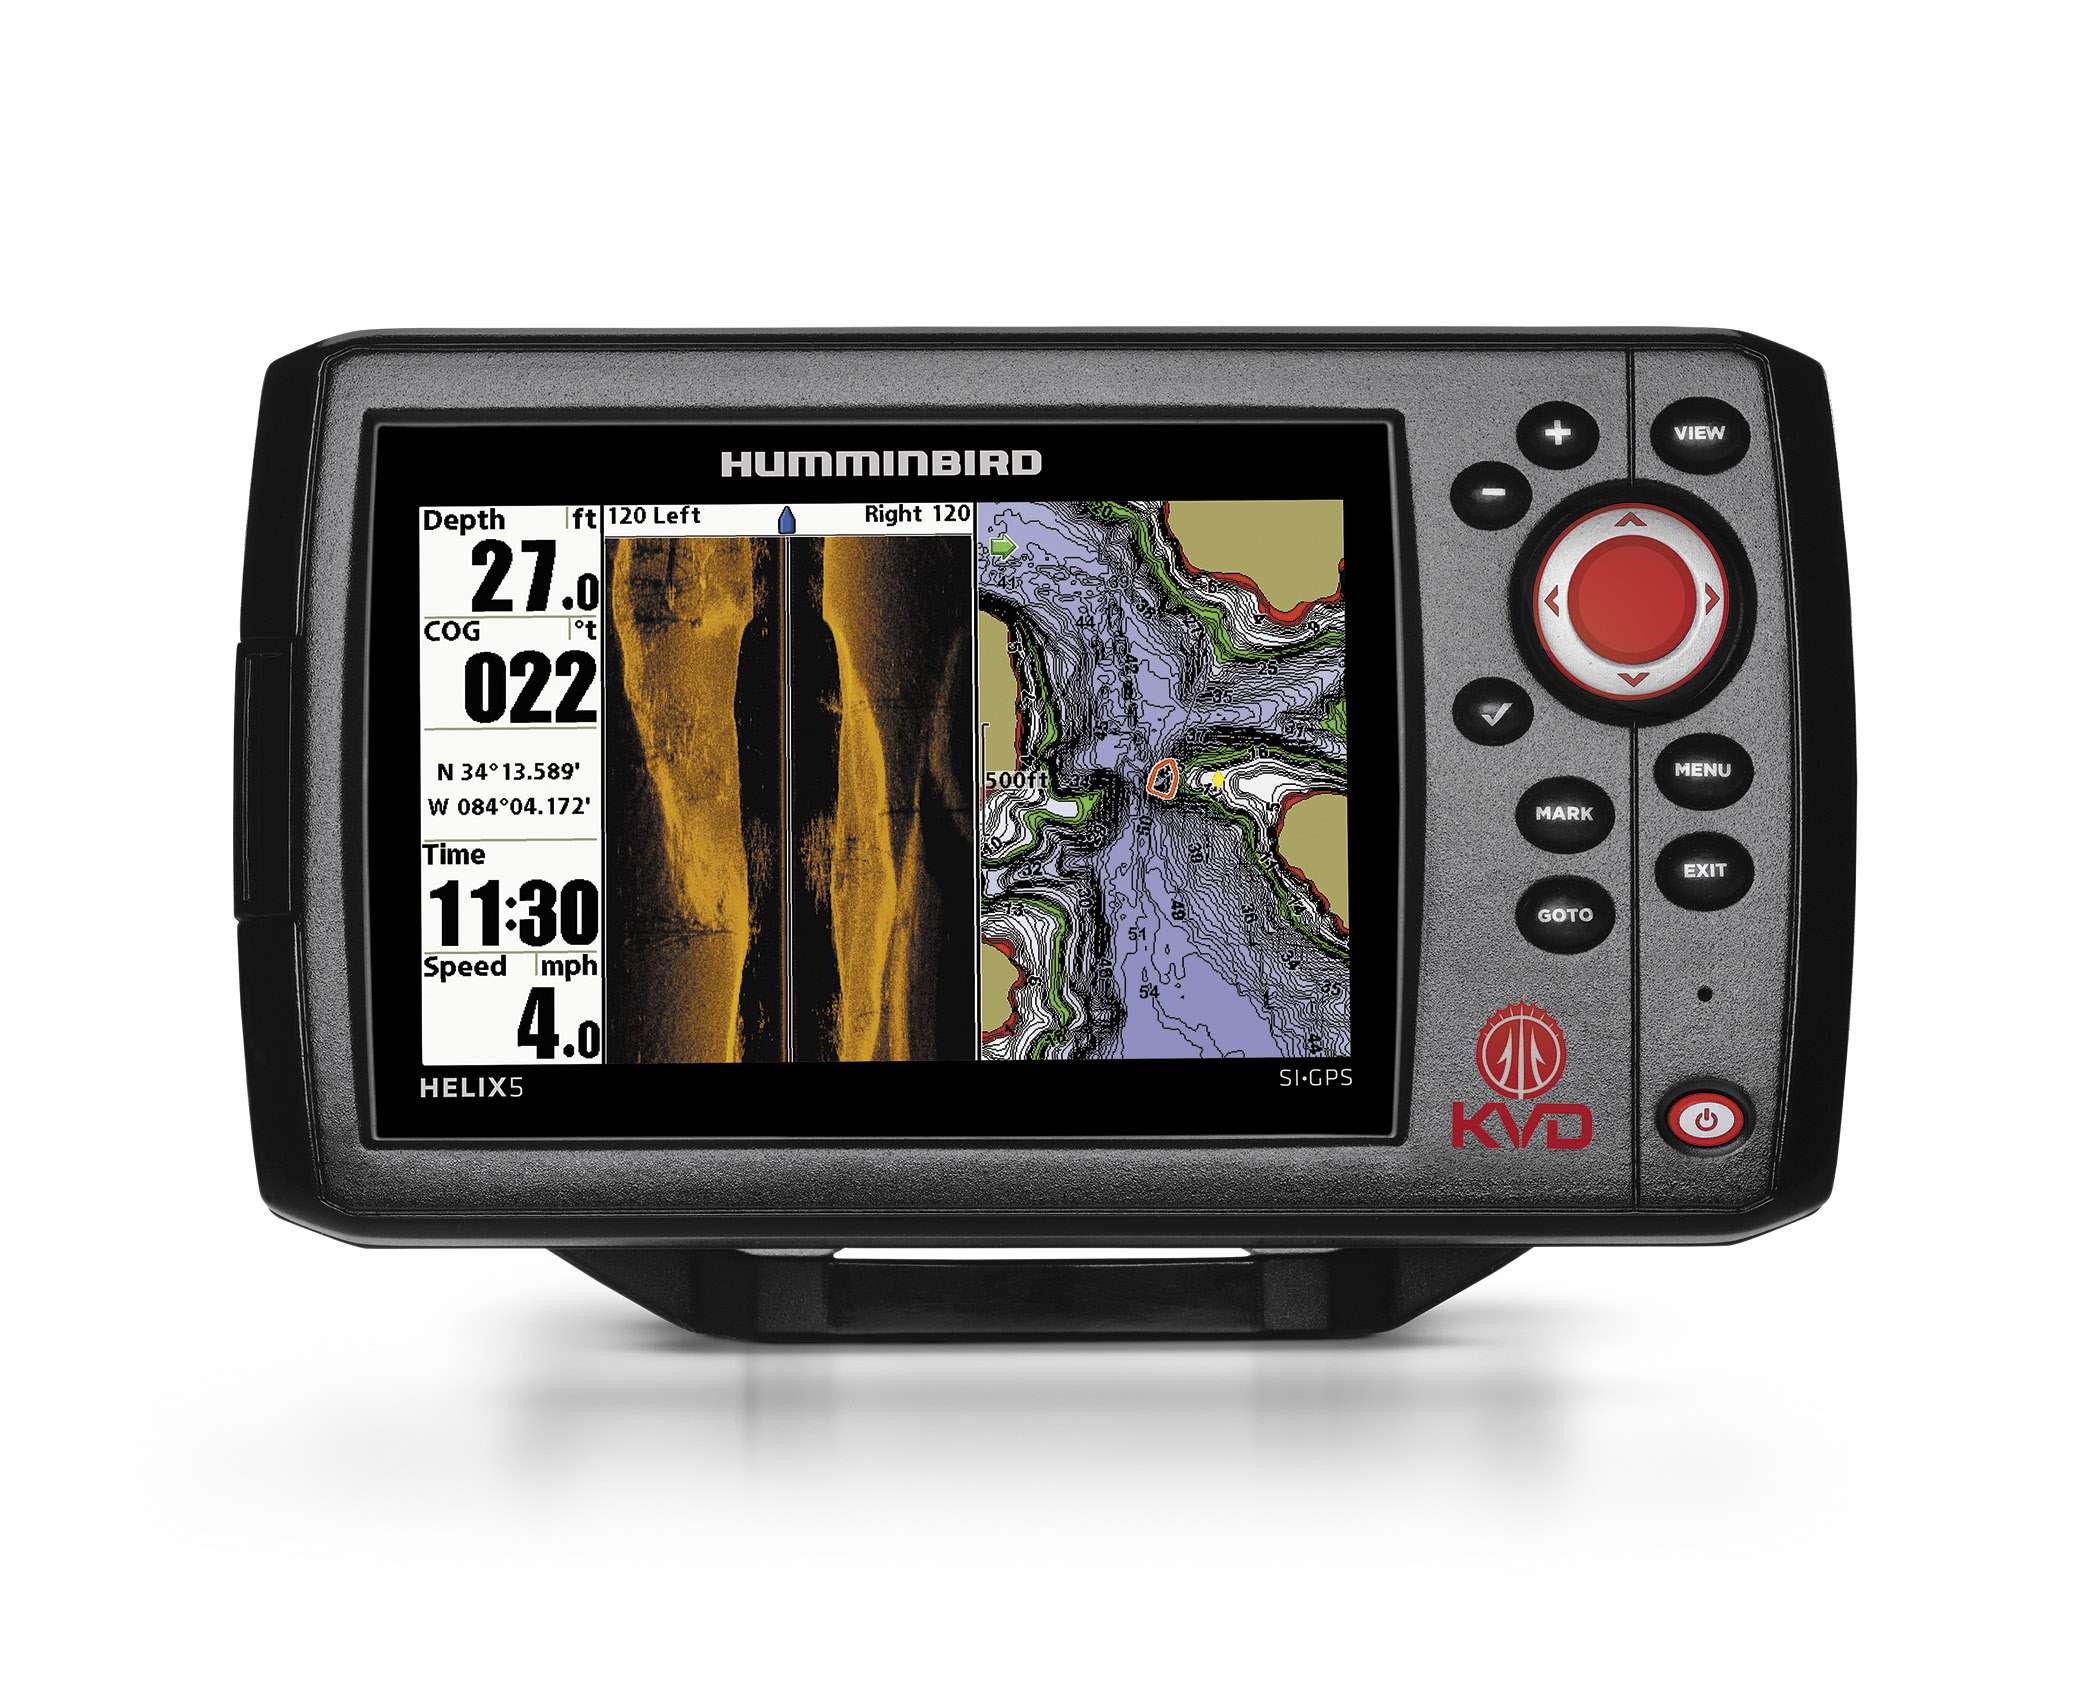 <B>HUMMINBIRD 1199CI HD SI KVD</b>
Built with insight from the best in the business, this Kevin VanDam-inspired unit has it all. This unit features a large 10.4-inch display with an LED backlight, side imaging and DualBeam Plus sonar, GPS chartplotting and two card slots to accommodate aftermarket maps. Humminbird is also releasing a new line of Helix units for those anglers wanting an economic option with the bells and whistles of higher-priced units.